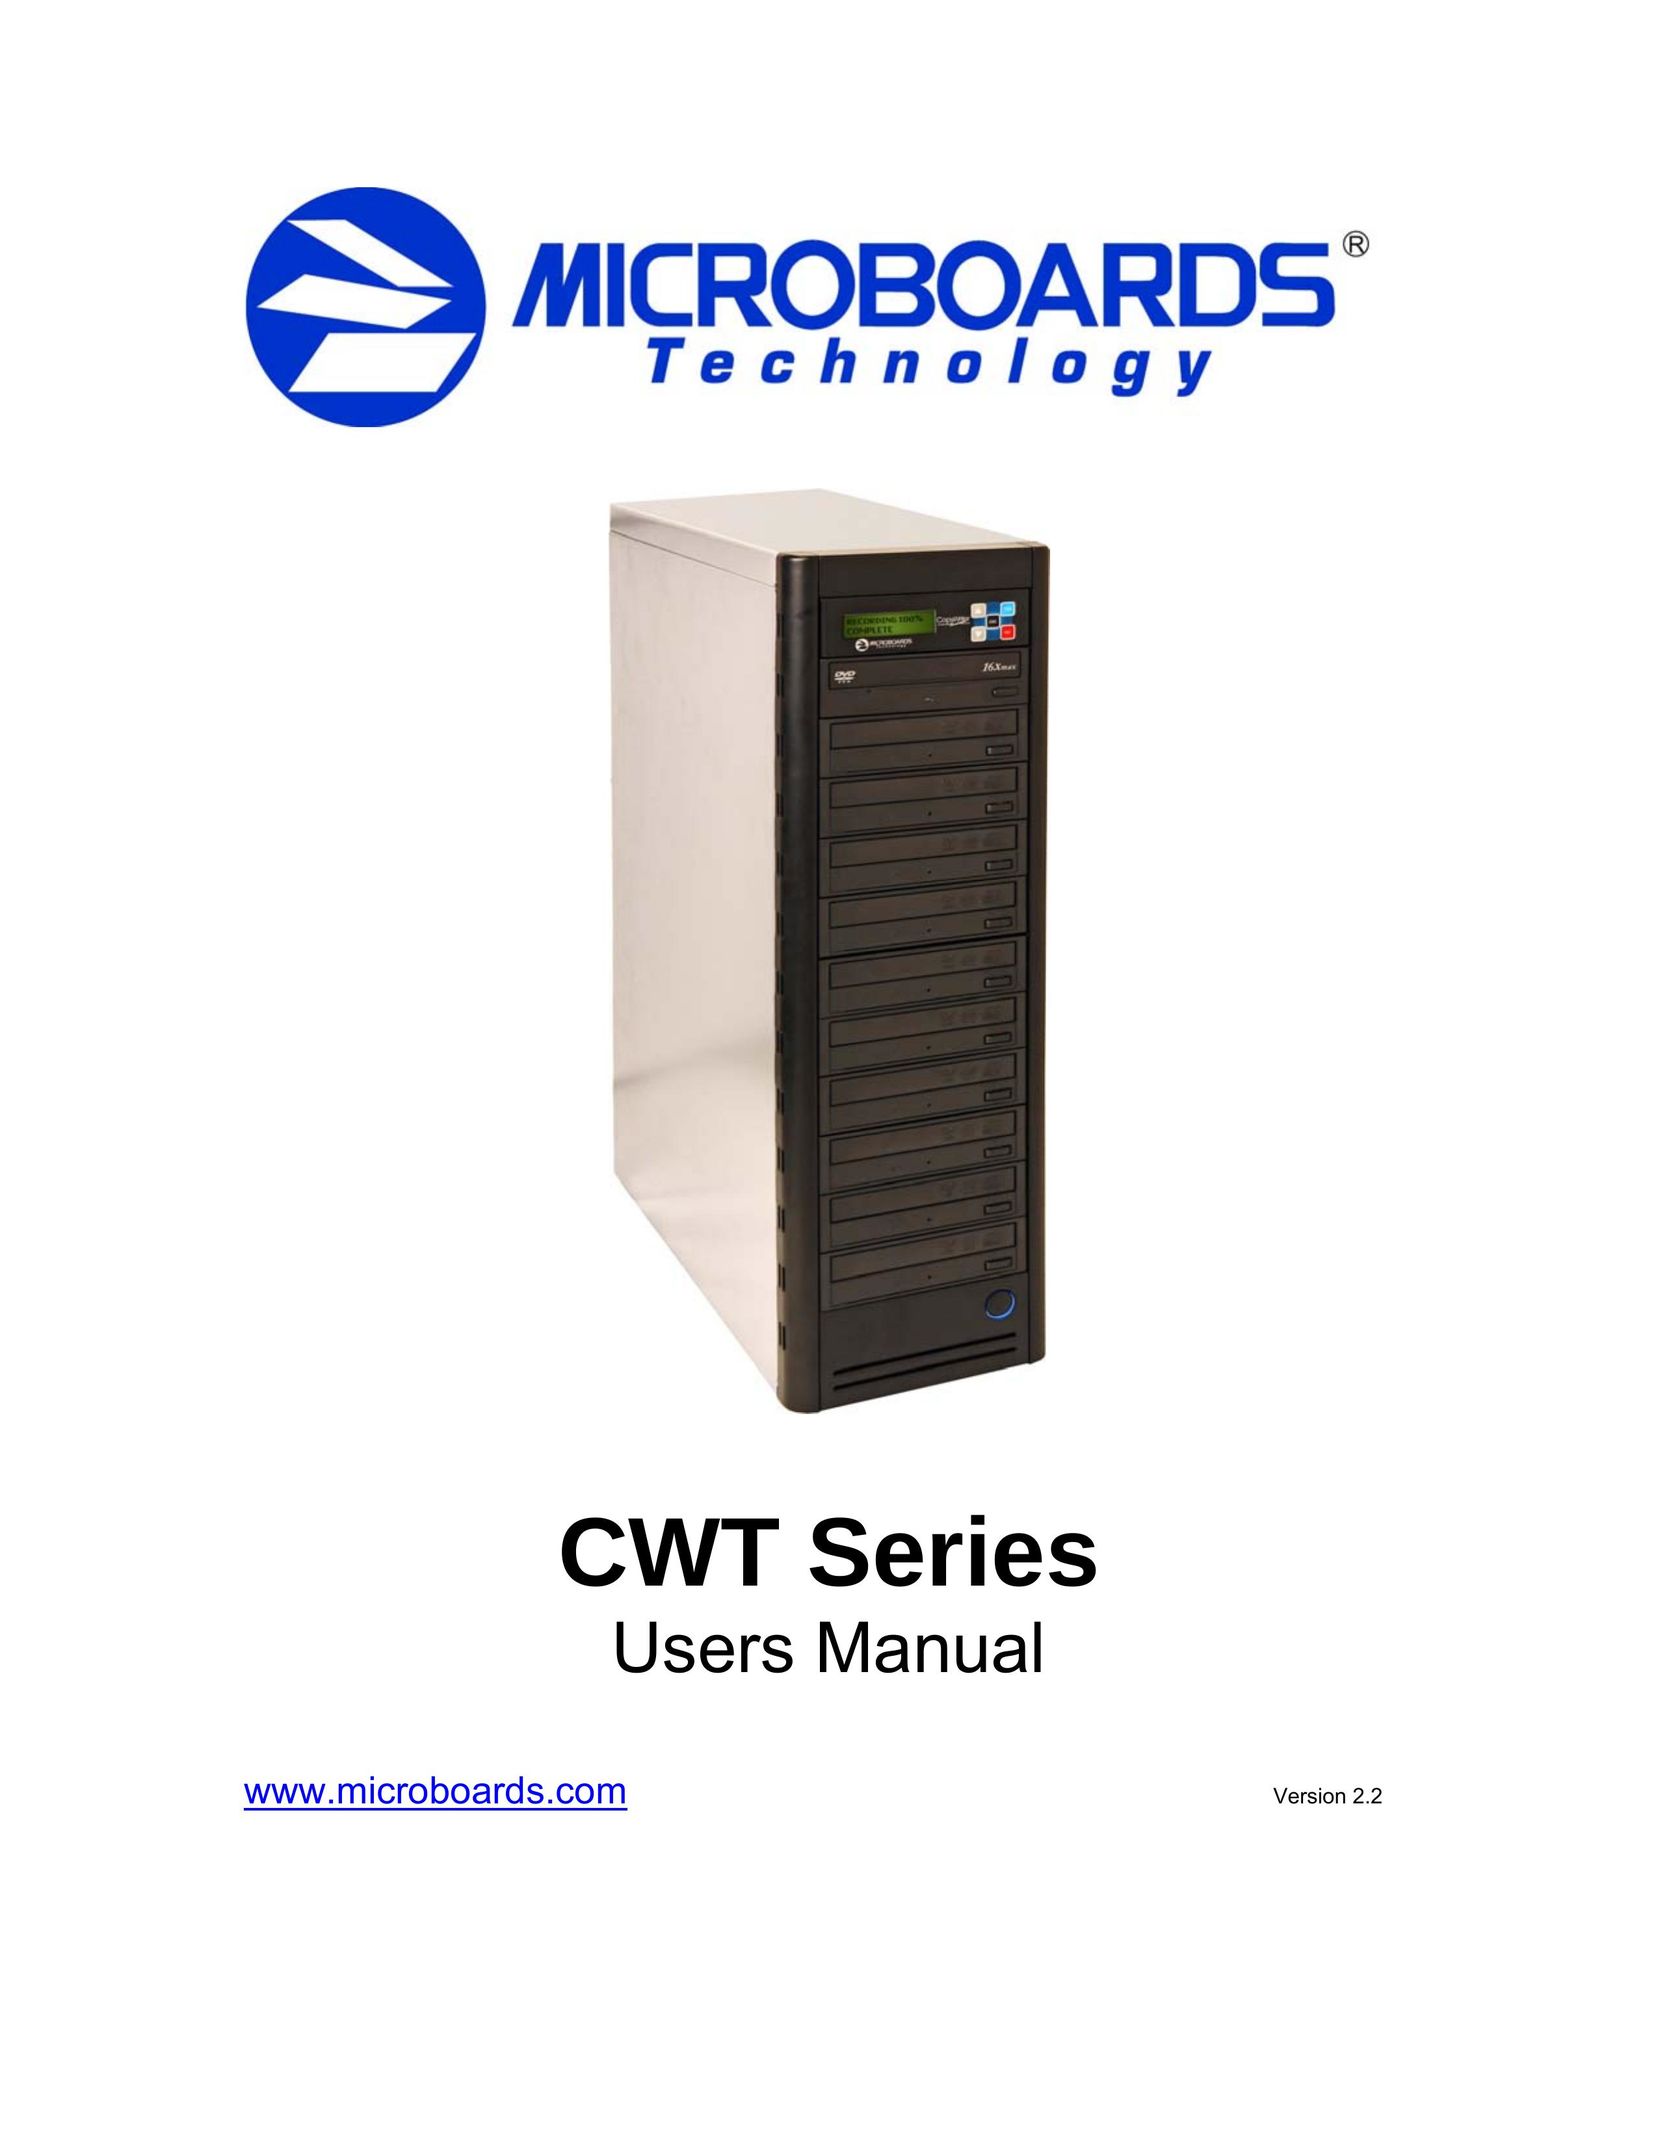 MicroBoards Technology CWT Series DVD Recorder User Manual